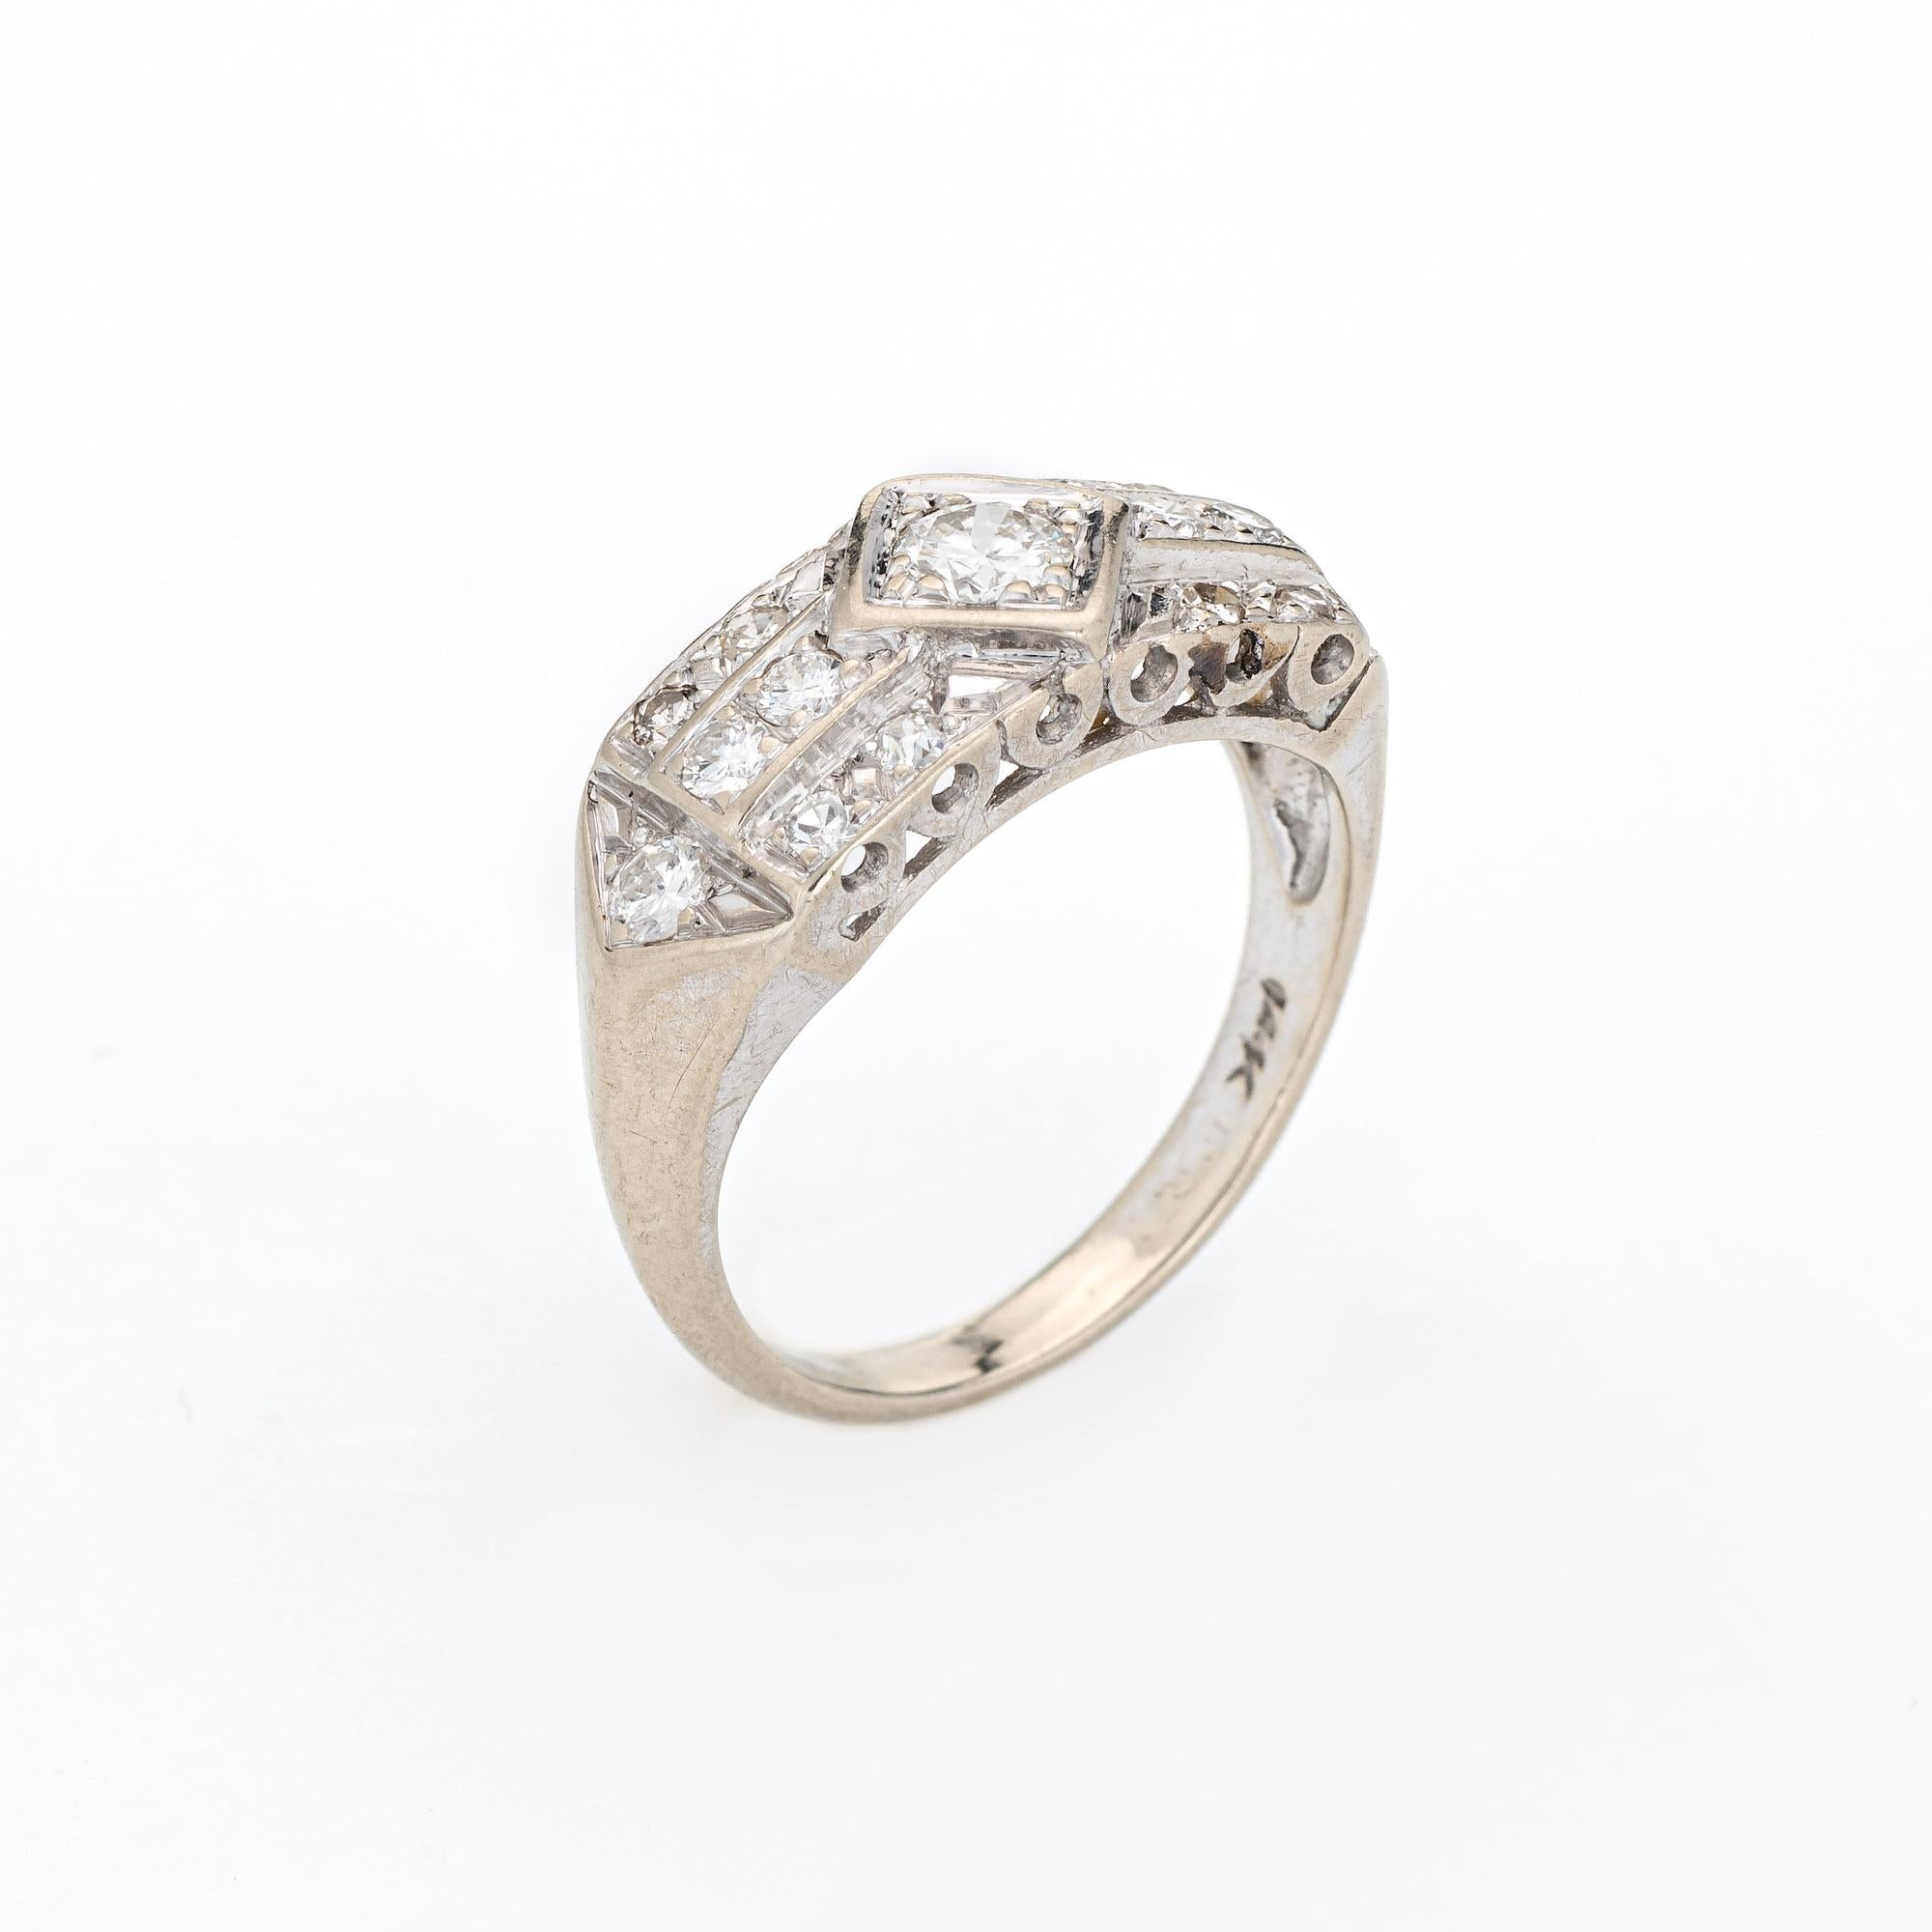 Finely detailed vintage Art Deco diamond wedding band (circa 1920s to 1930s) crafted in 14 karat white gold. 

Centrally mounted estimated 0.20 carat old European cut diamond is accented with a further 14 estimated 0.02 to 0.04 carat diamonds. The